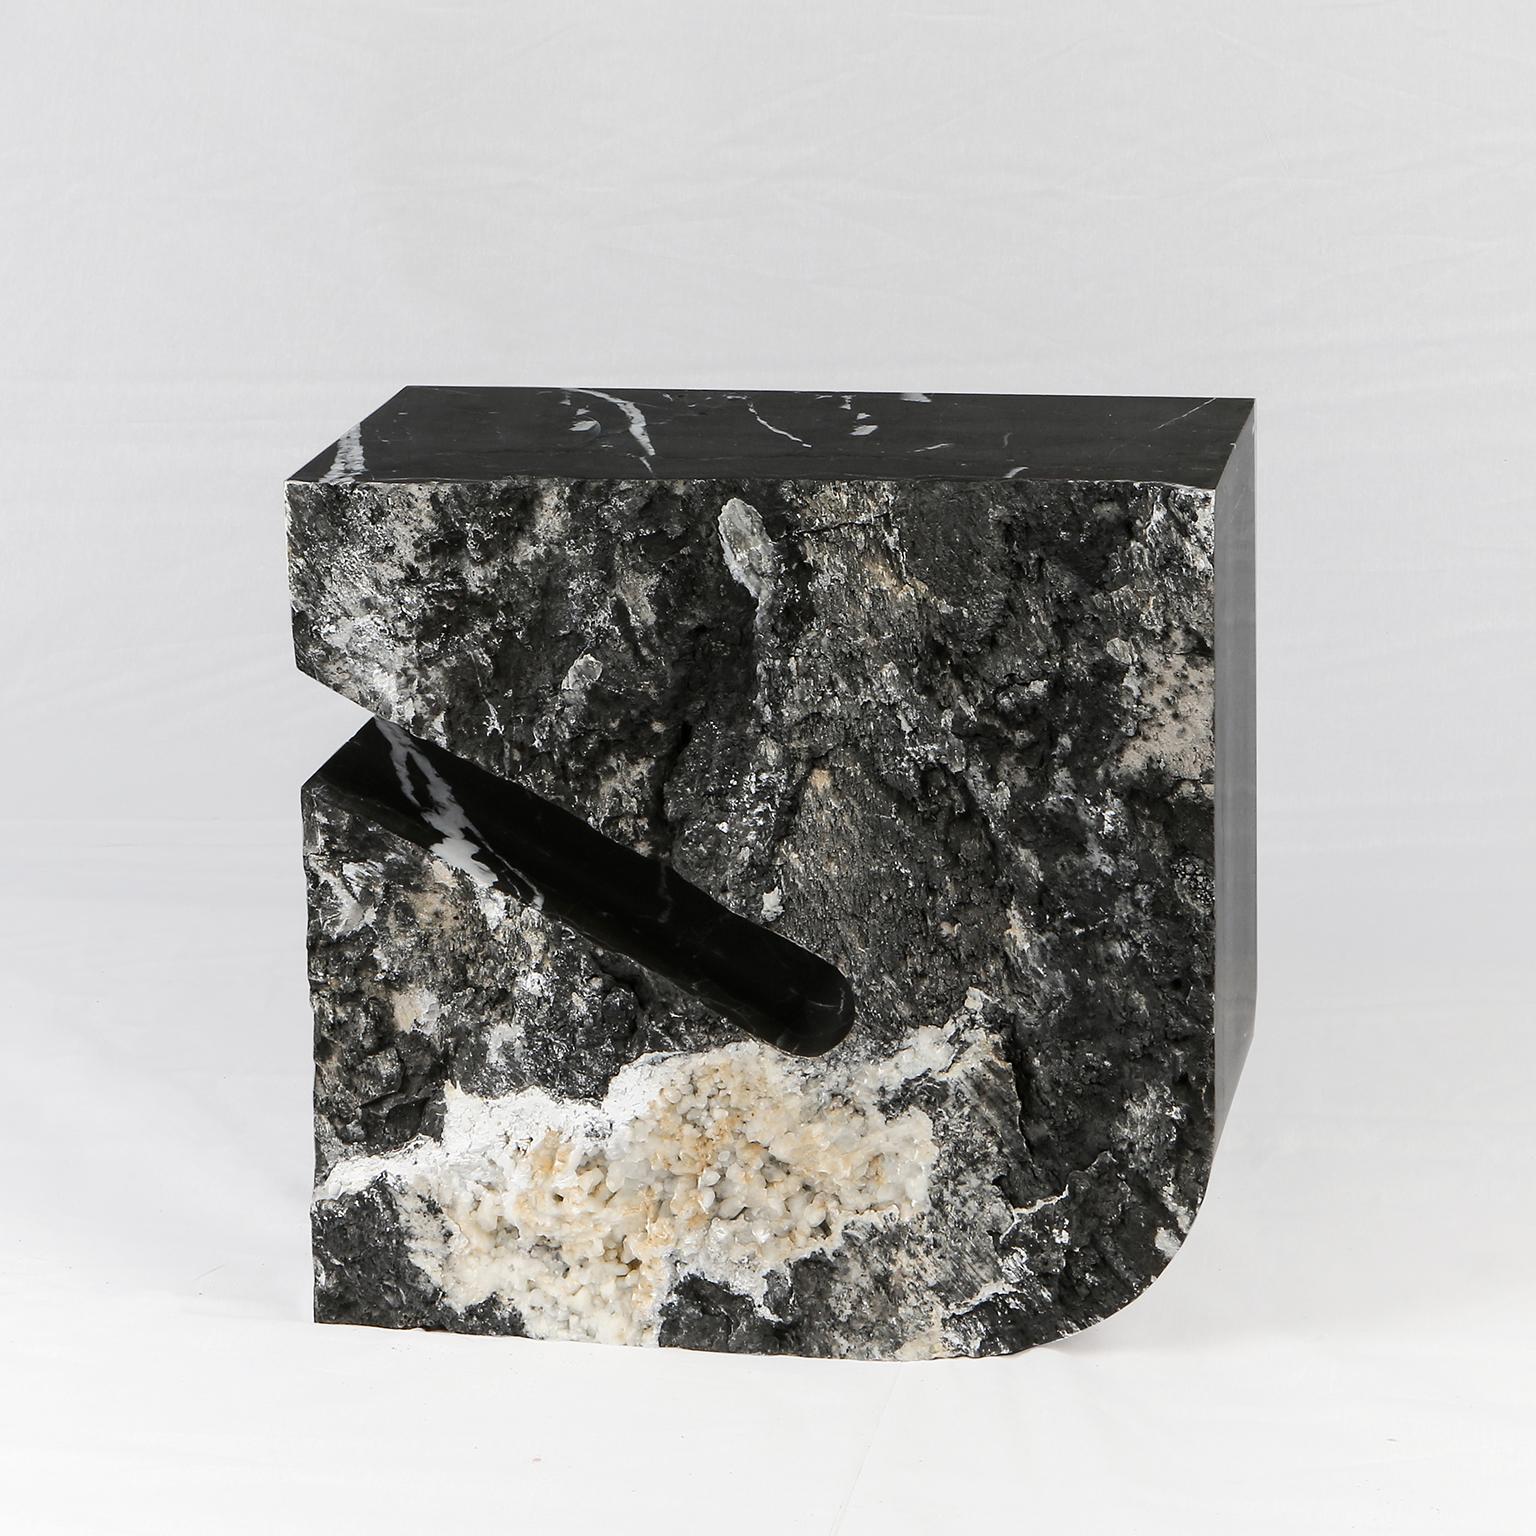 Turkish Sculptural Geometric Side Table in Black Marble For Sale